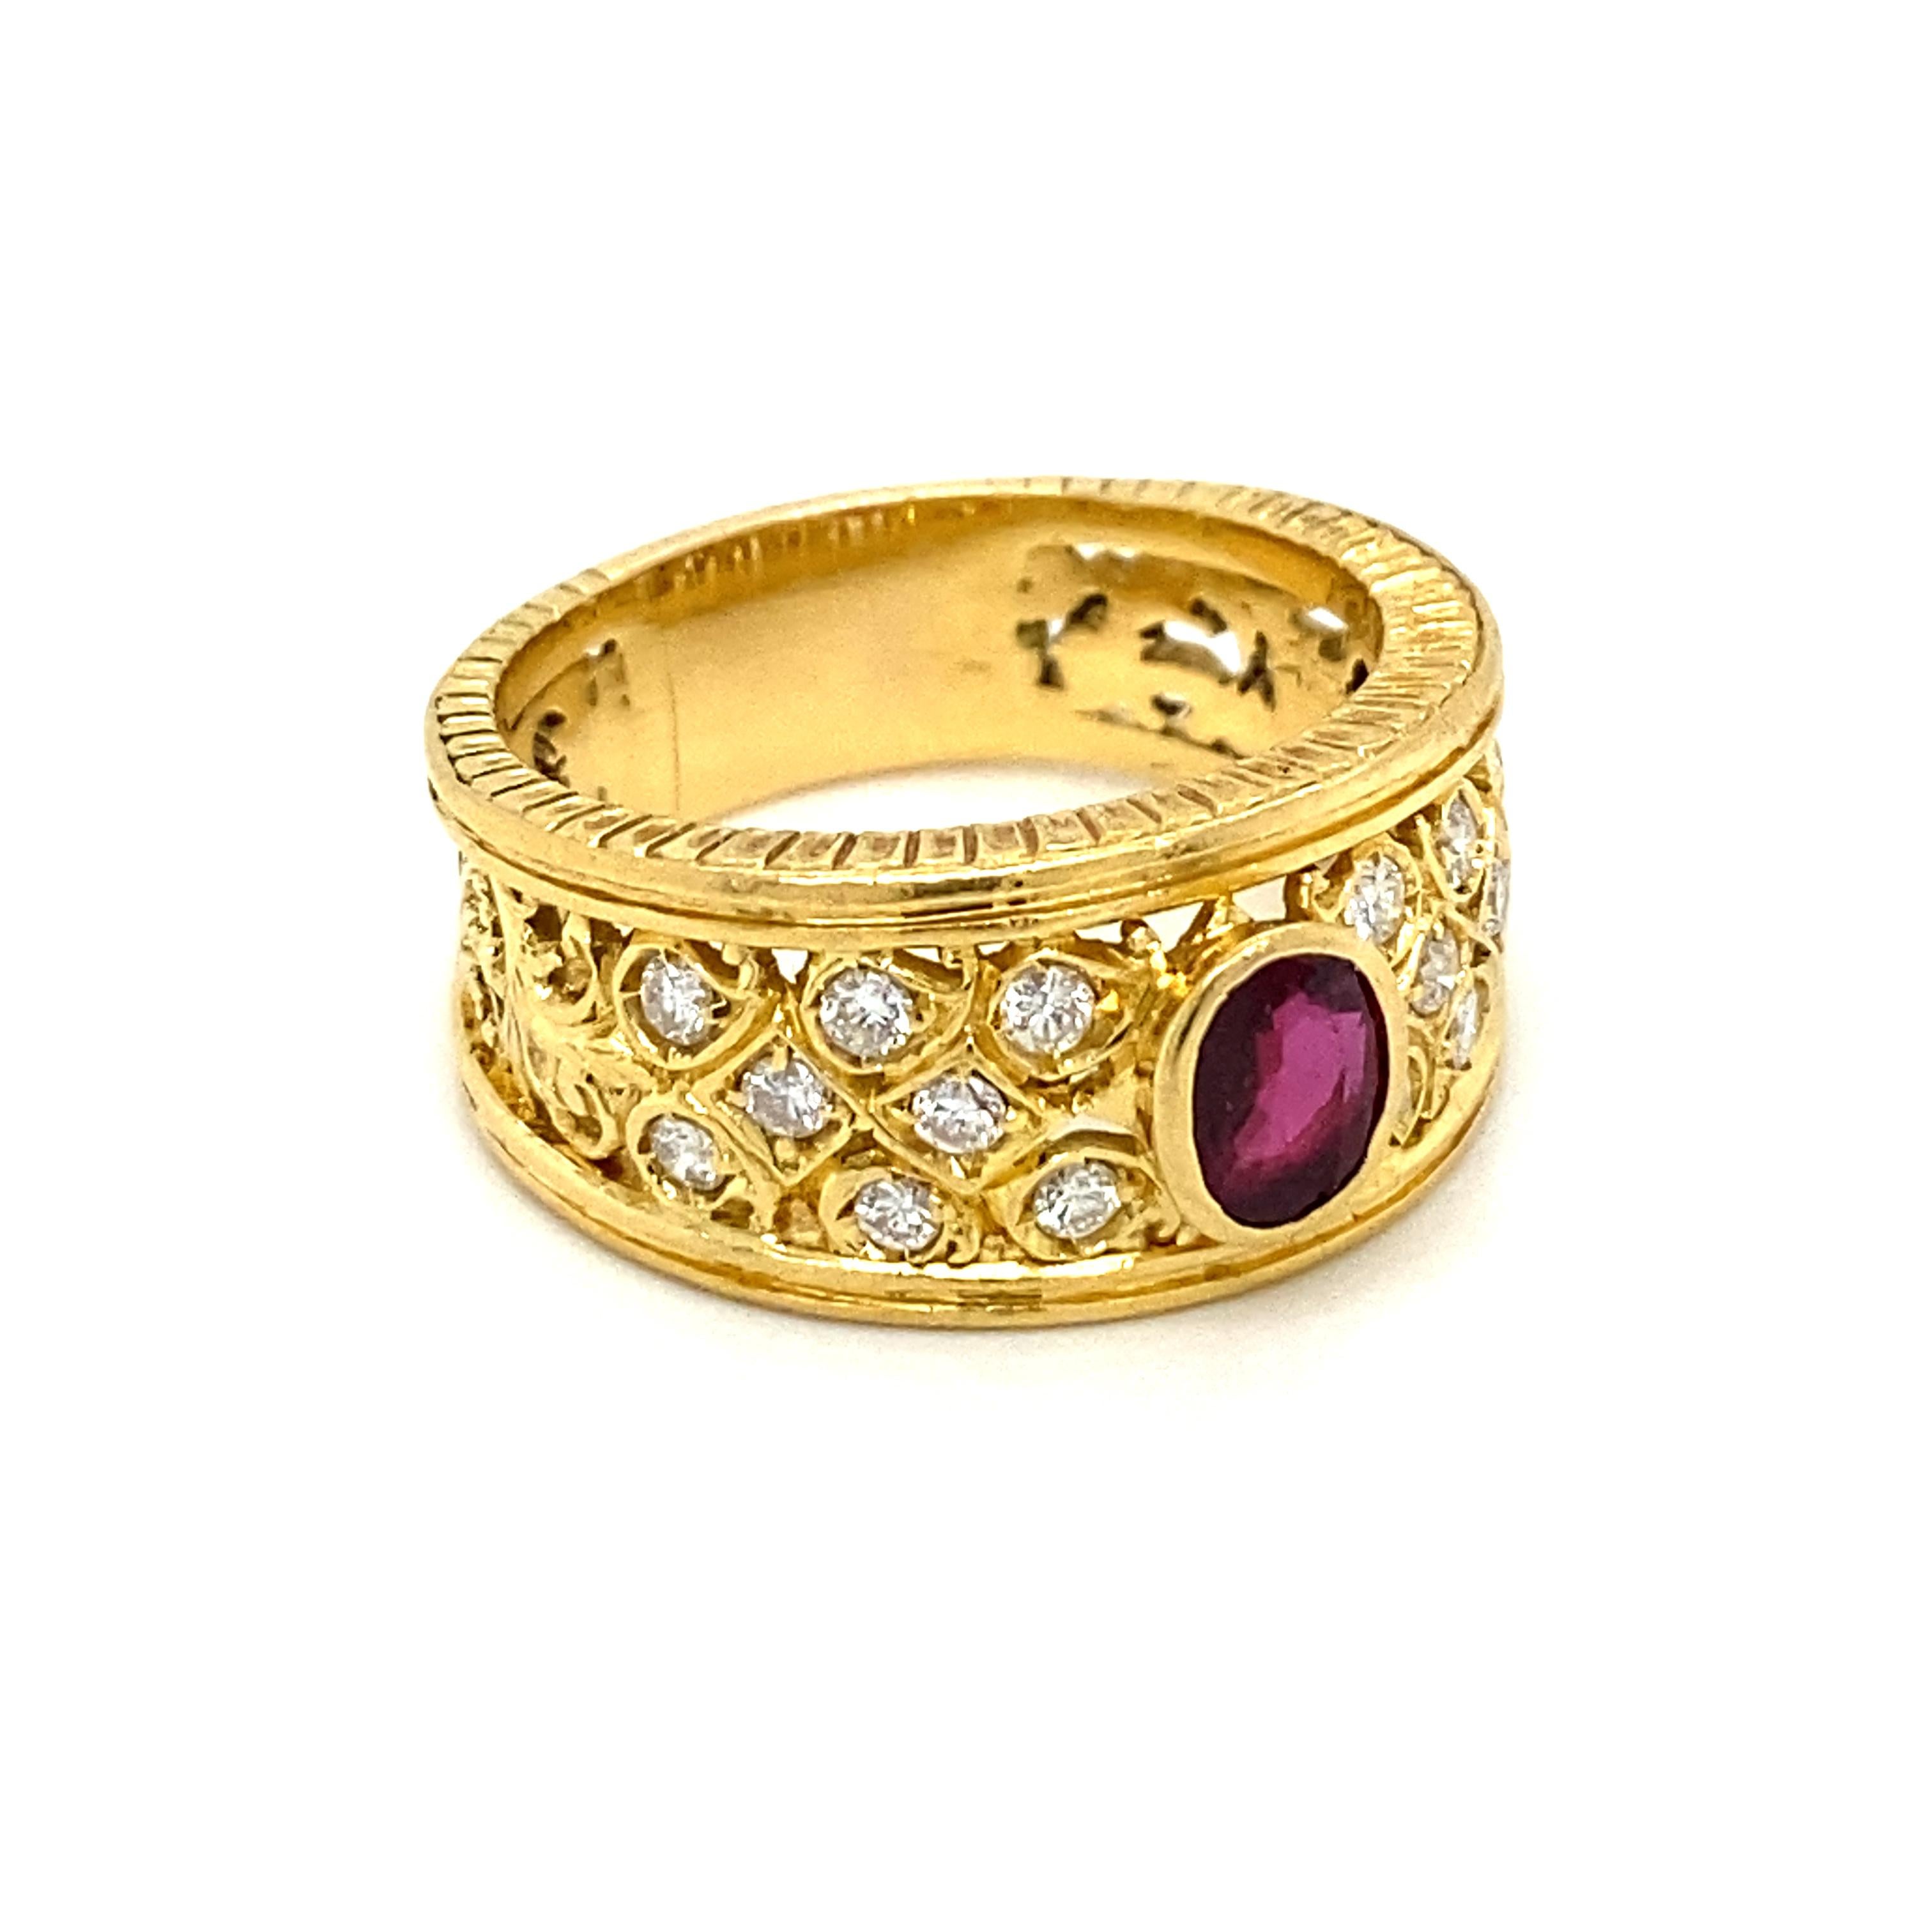 18k yellow gold band ring, handcrafted in Italy, featuring approx. 1,20 ct. Natural Oval shaped Ruby, adorned with approx. 0.50 ct. in H/VS European cut diamonds. The engraving work make this piece unique

CONDITION: Pre-Owned - Excellent 
METAL: